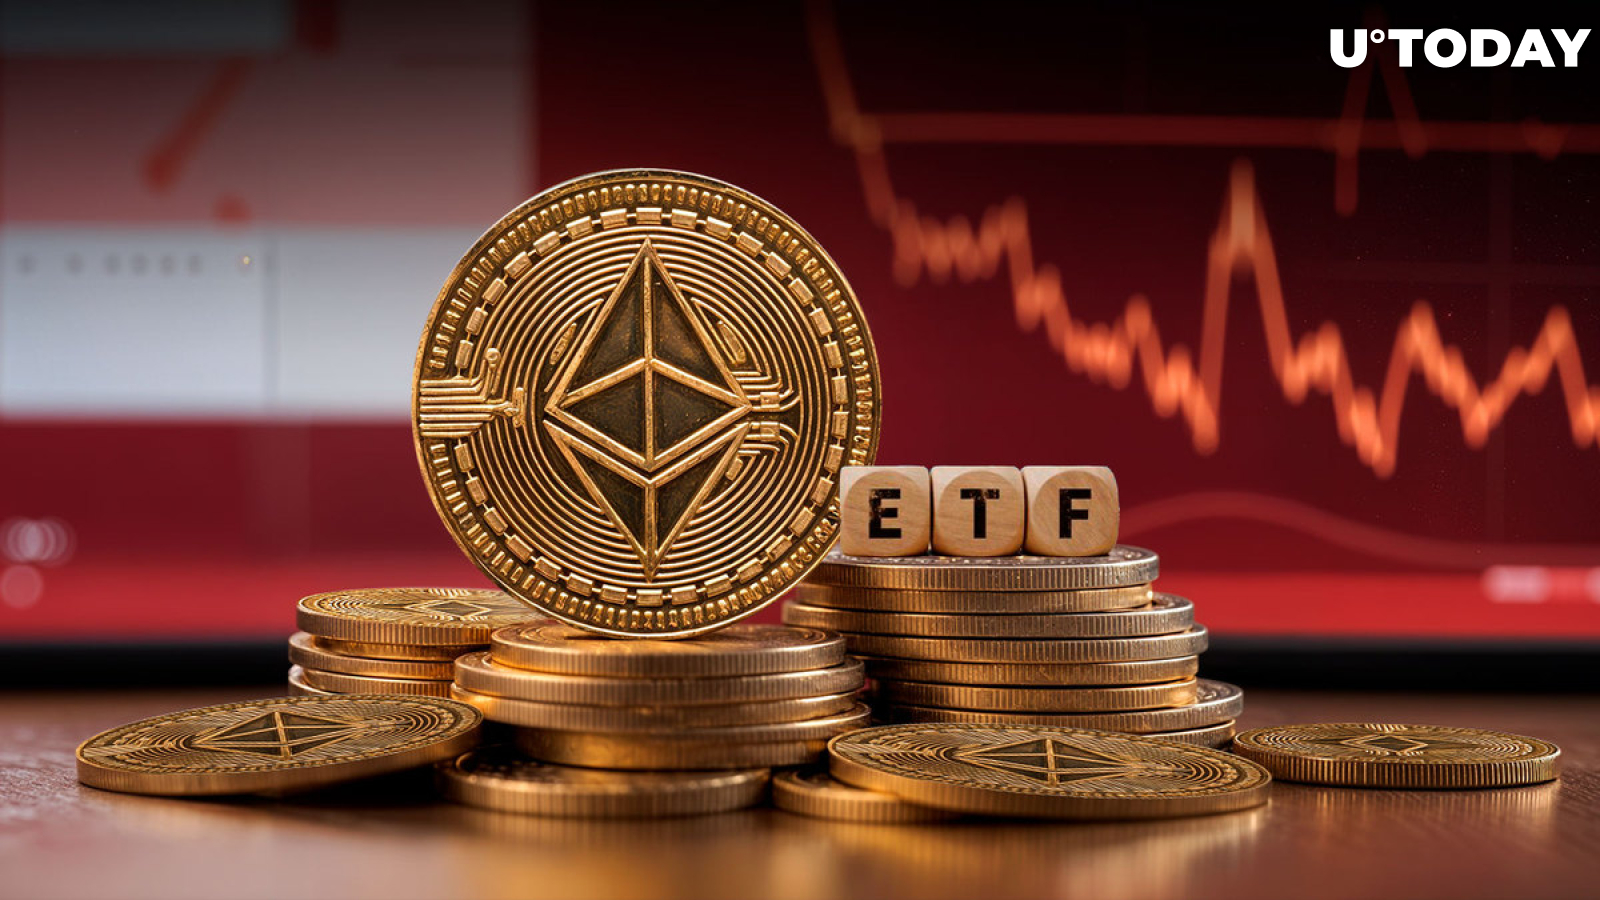 3 Reasons Why Ethereum Is Not Going to Moon After ETF Approval